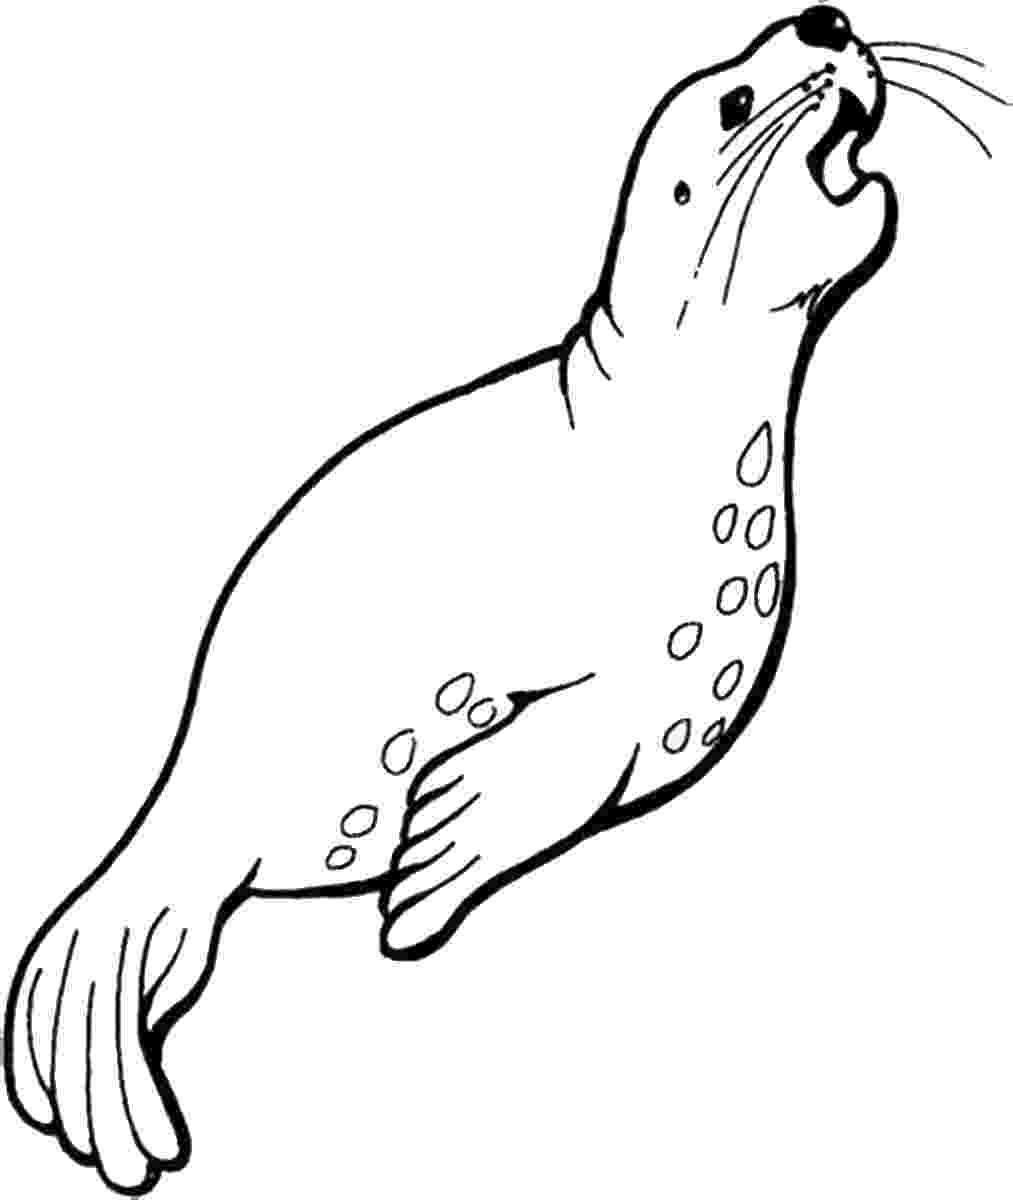 leopard seal coloring pages leopard seal coloring pages download and print for free leopard seal coloring pages 